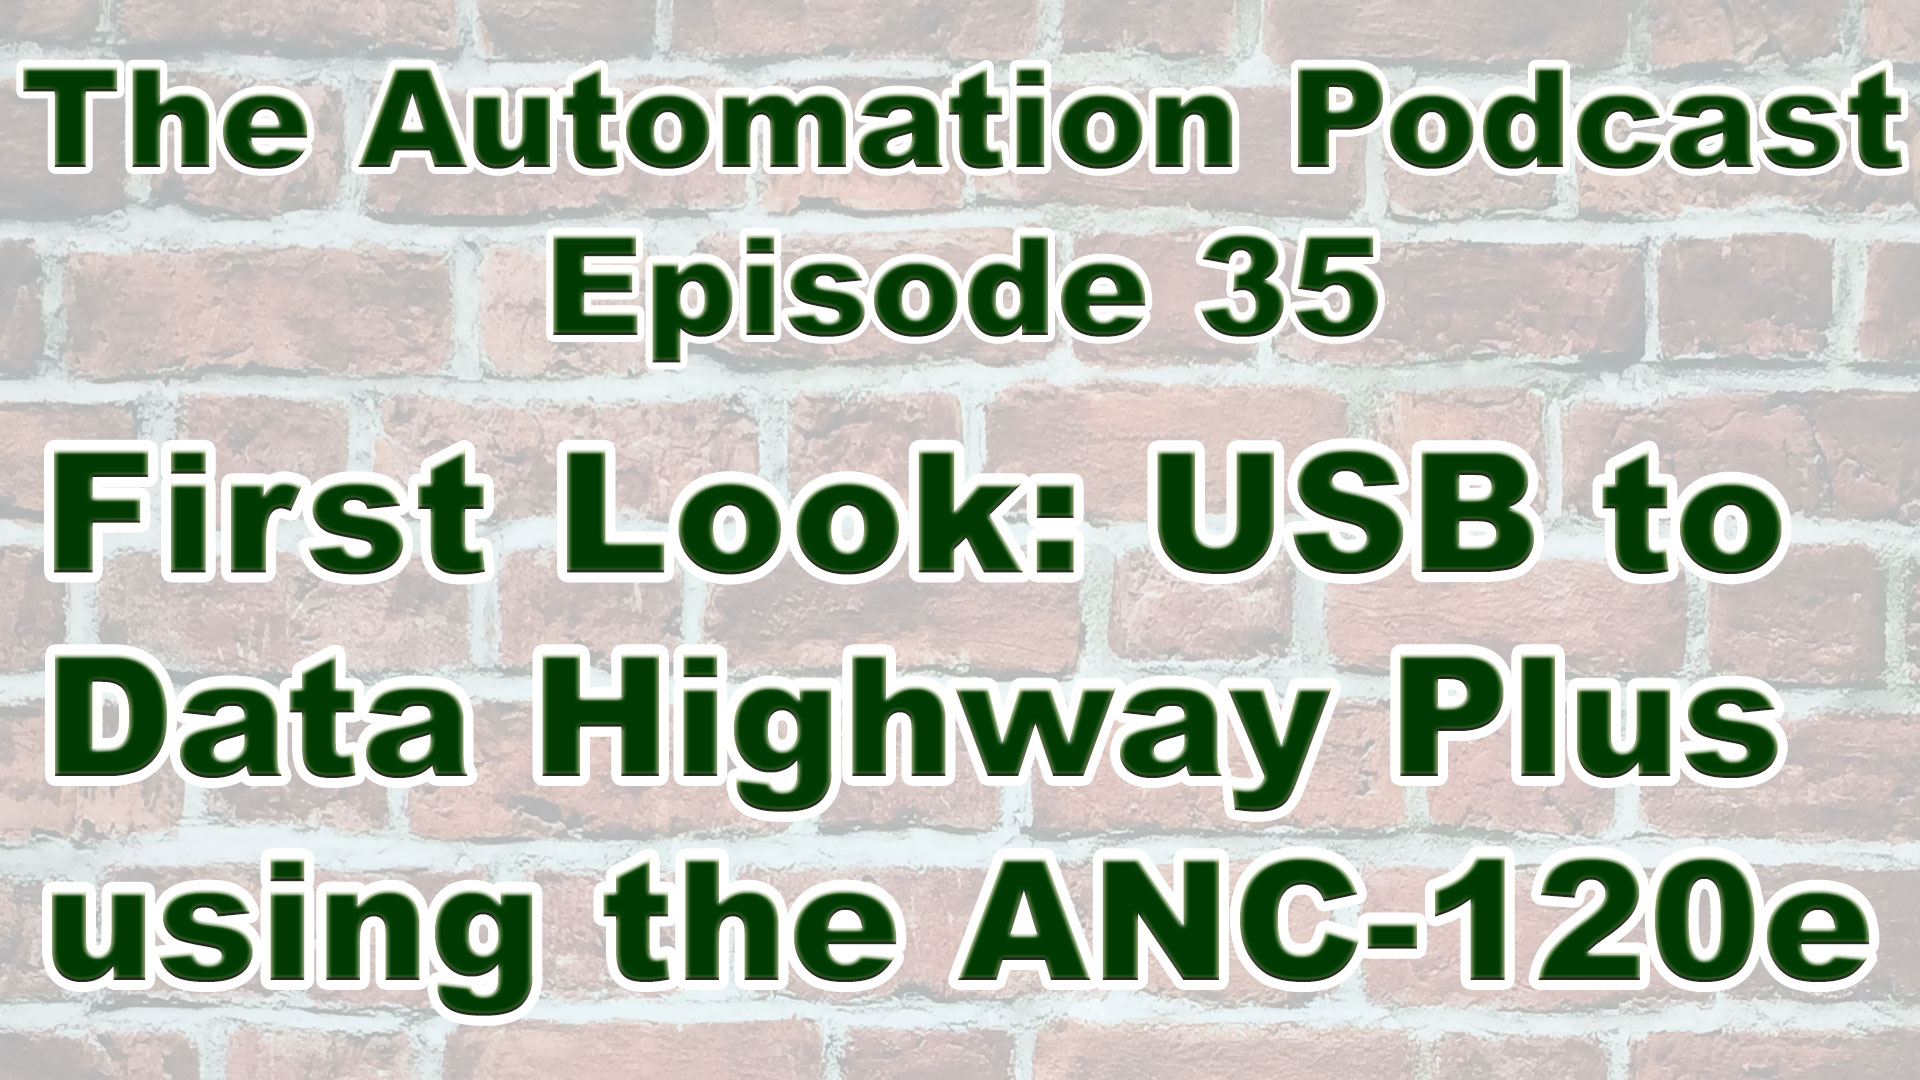 USB To Data Highway Plus (DHP, DH+) - First Look and Use of the ANC-120e (P35)